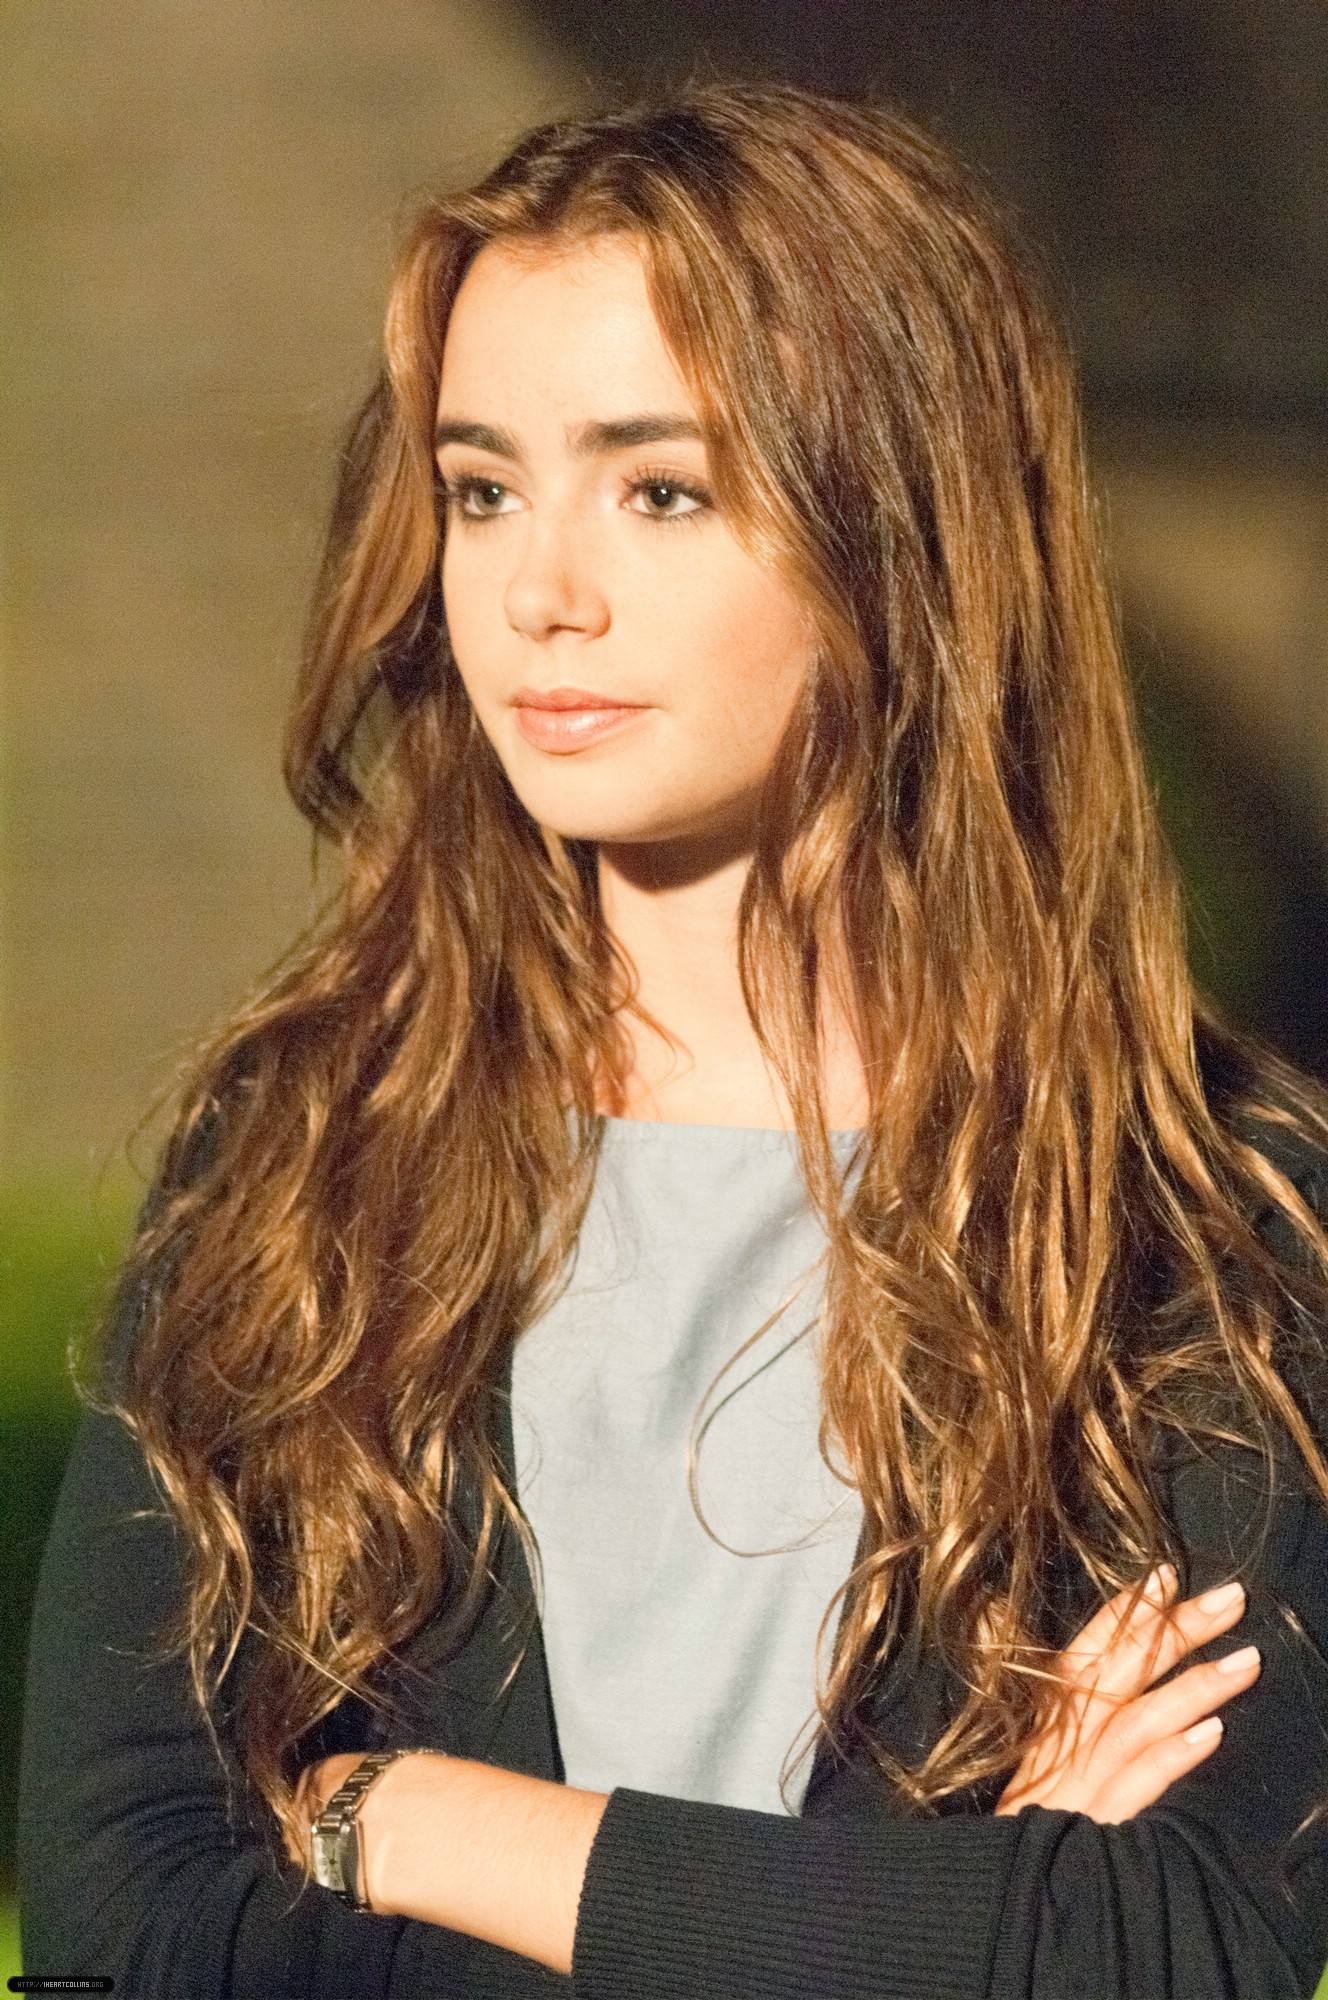 Lily Collins Image Jpg